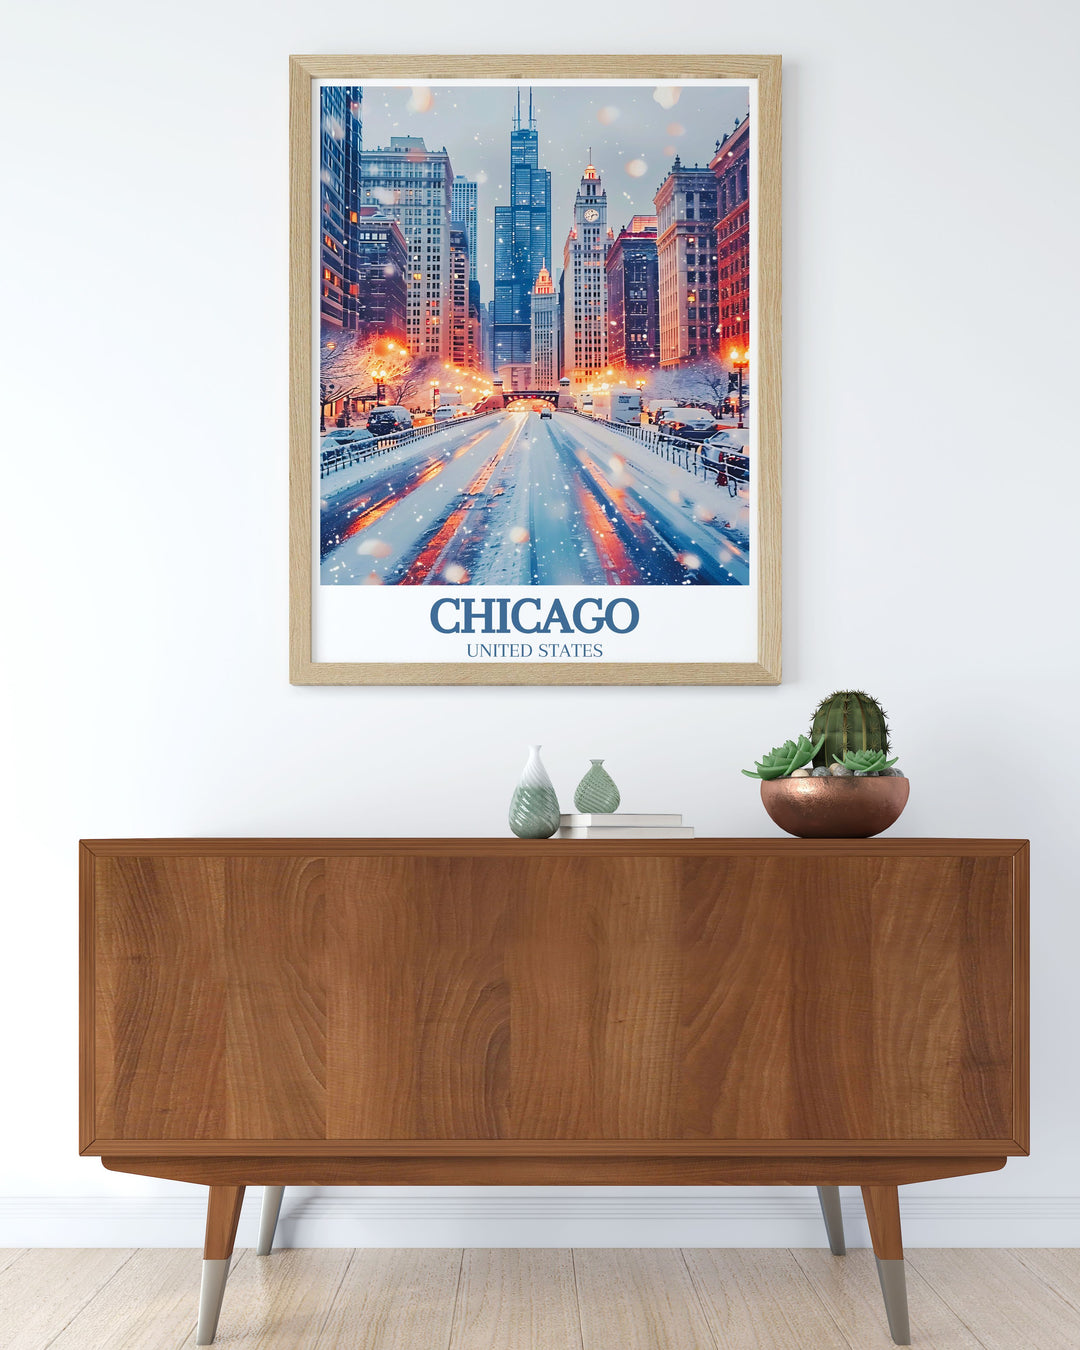 Capture the essence of Chicago with this stunning wall art print, featuring the Magnificent Miles luxurious shops and iconic buildings. Michigan Avenues charm is beautifully illustrated in this travel poster, ideal for enhancing any room with urban sophistication.